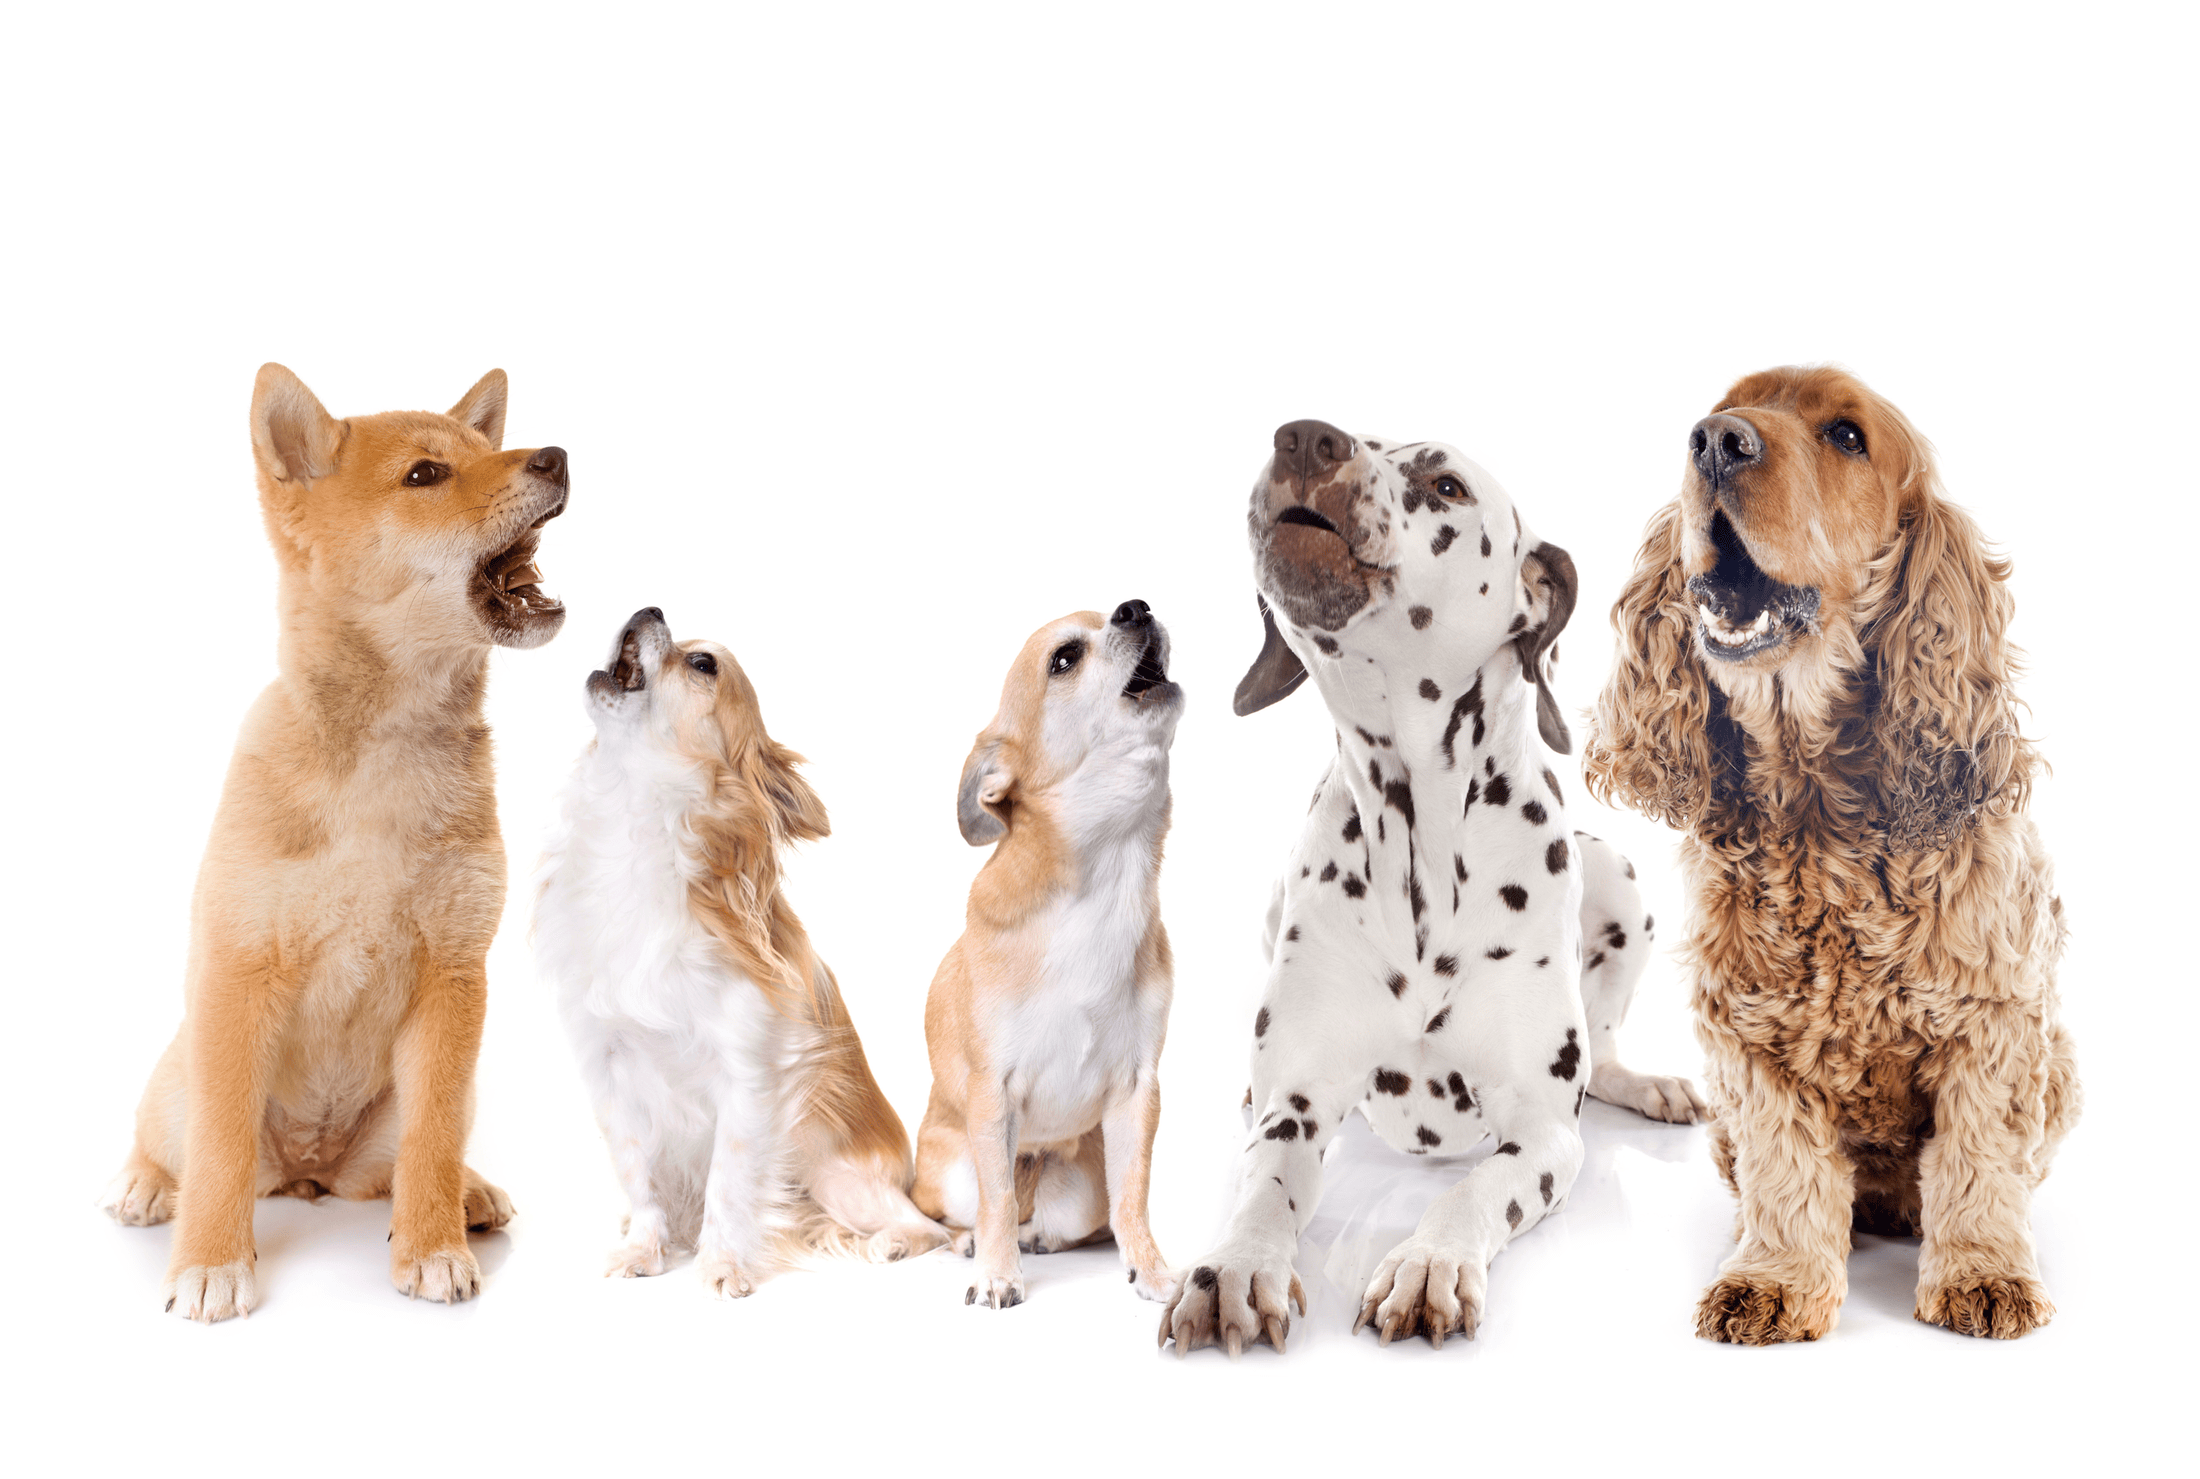 Most dogs mainly howl at other dogs. This behavior also depends on dog breed.